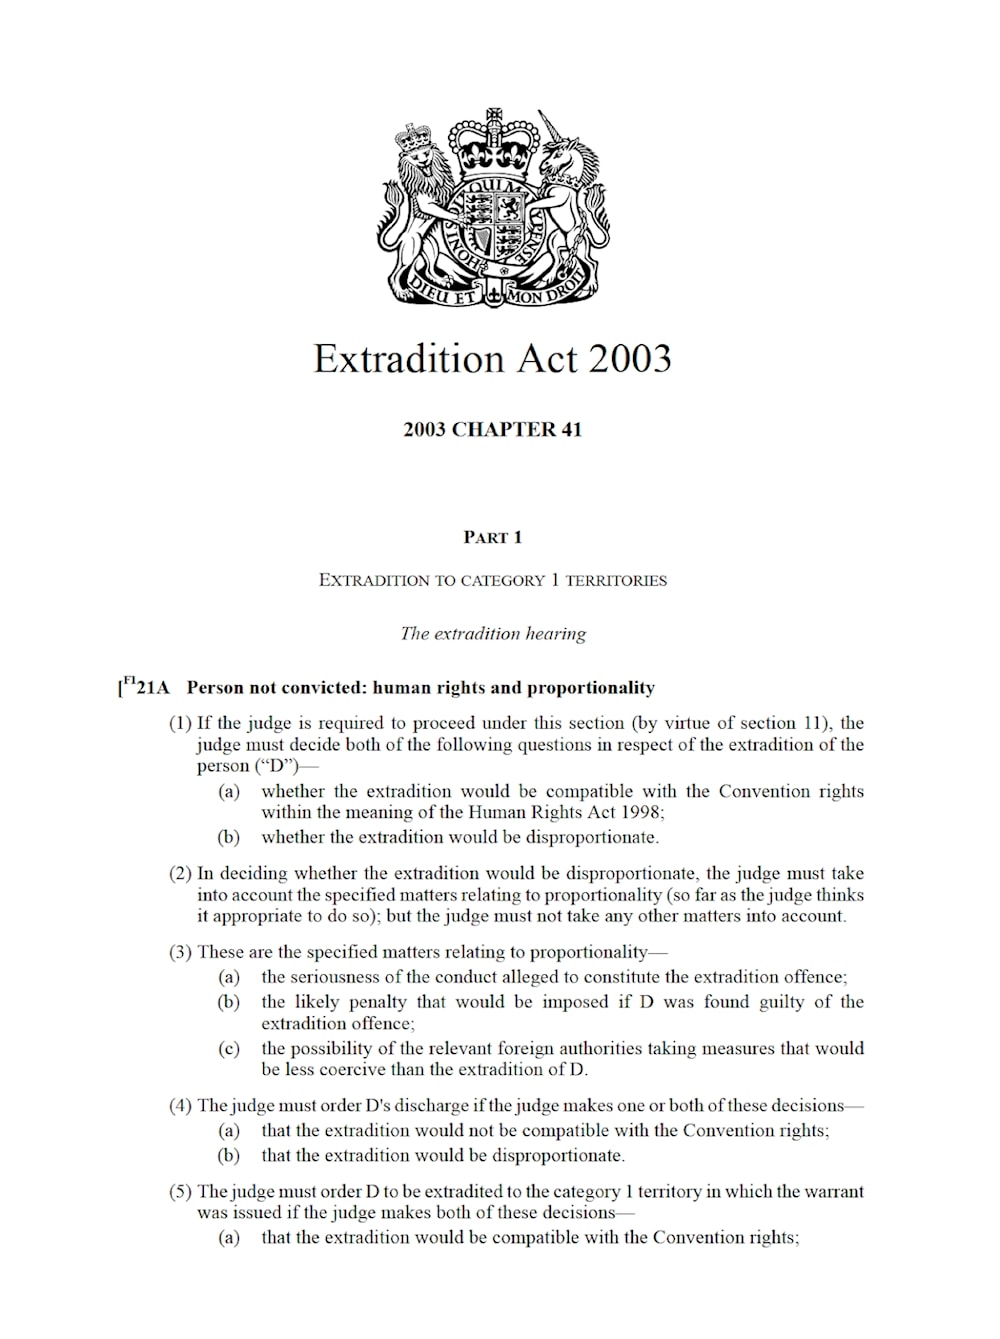 The Extradition Act is the implementation of the US-UK Extradition Treaty inside British law.